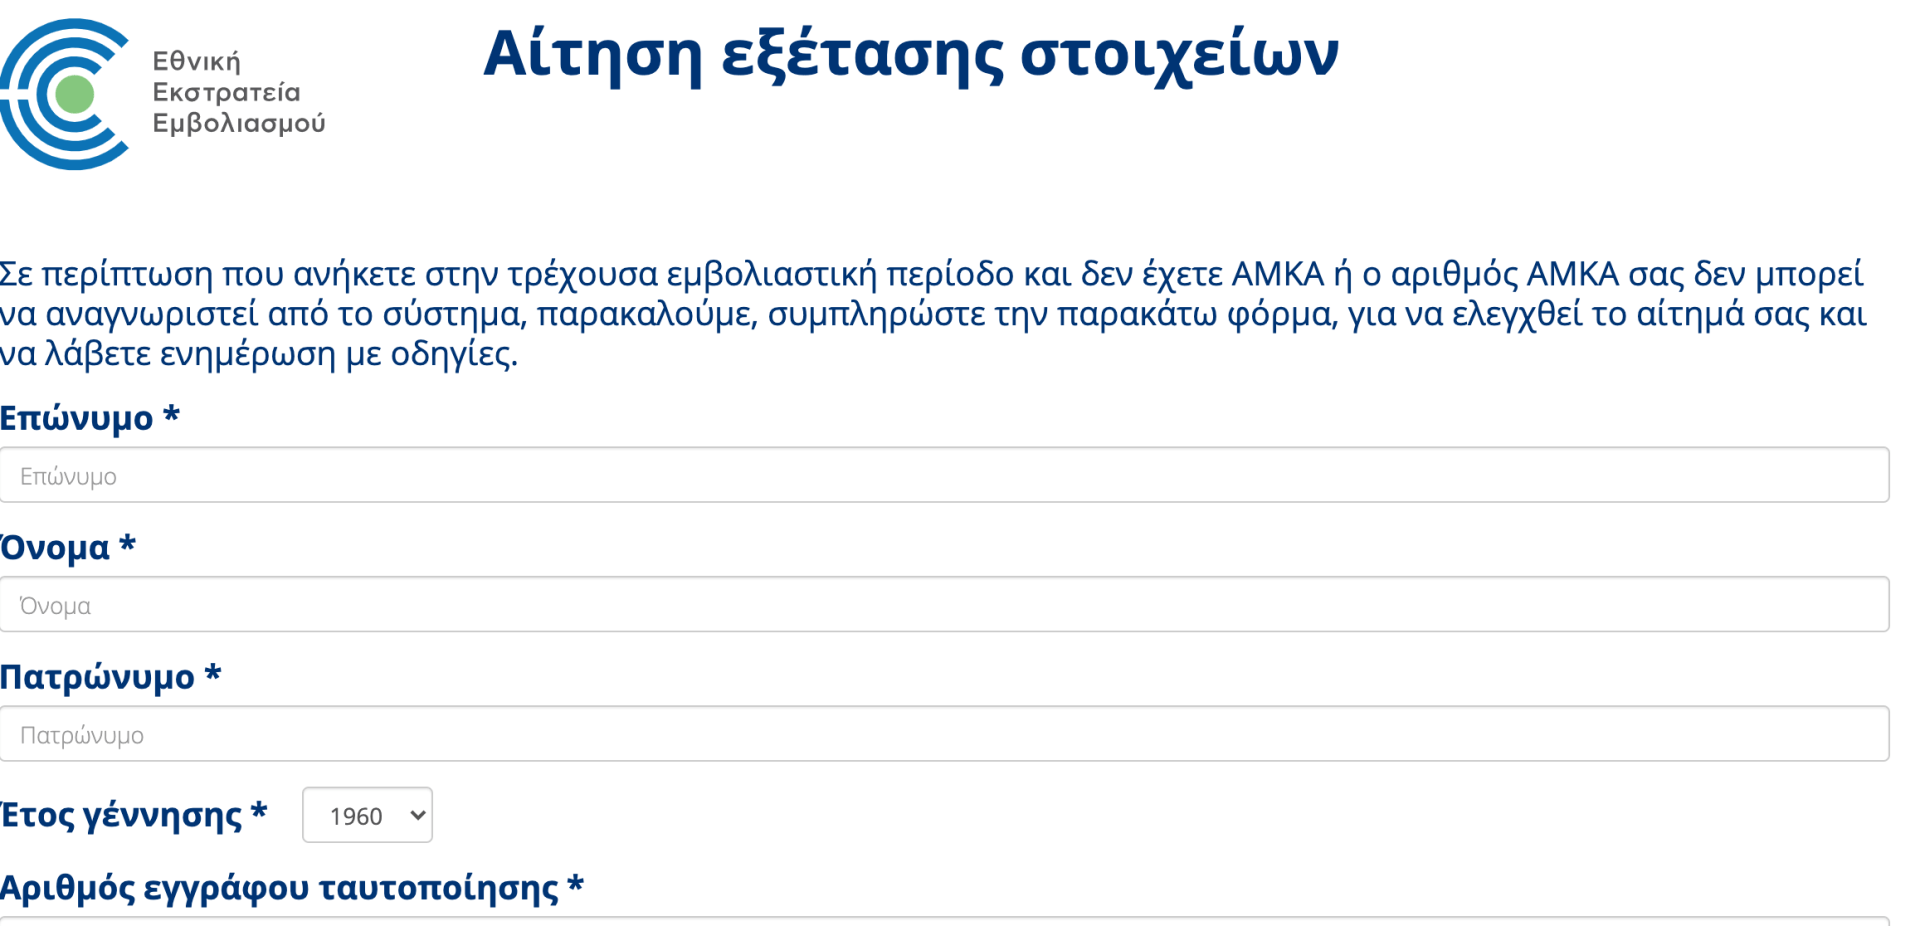 AMKA social security number for Greece